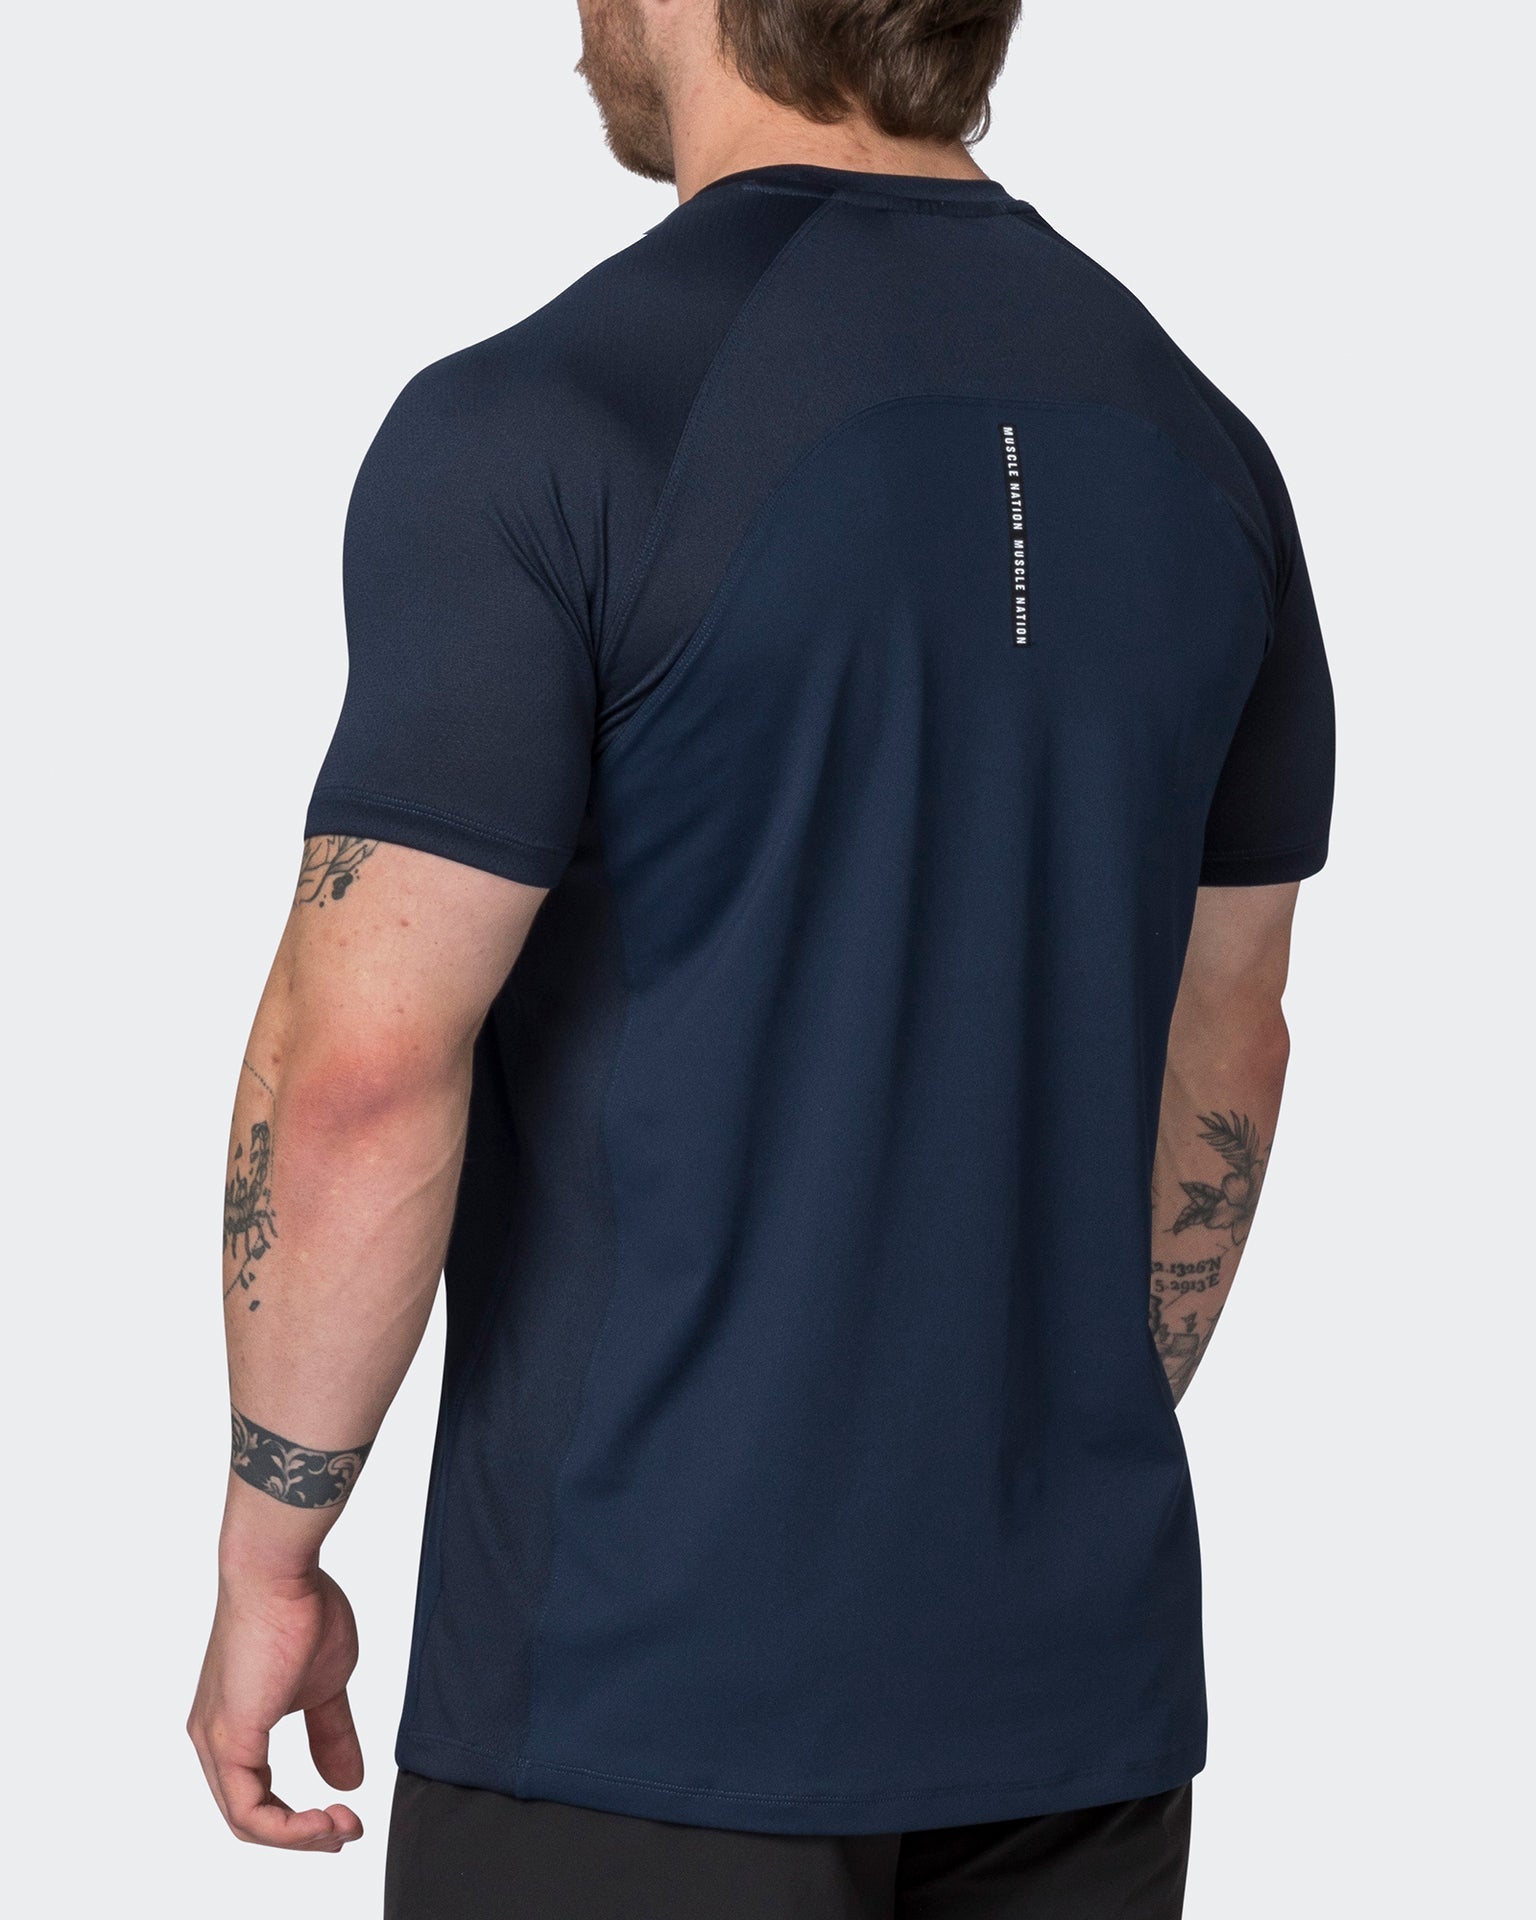 Muscle Nation T-Shirts Ventilation Tee - Odyssey